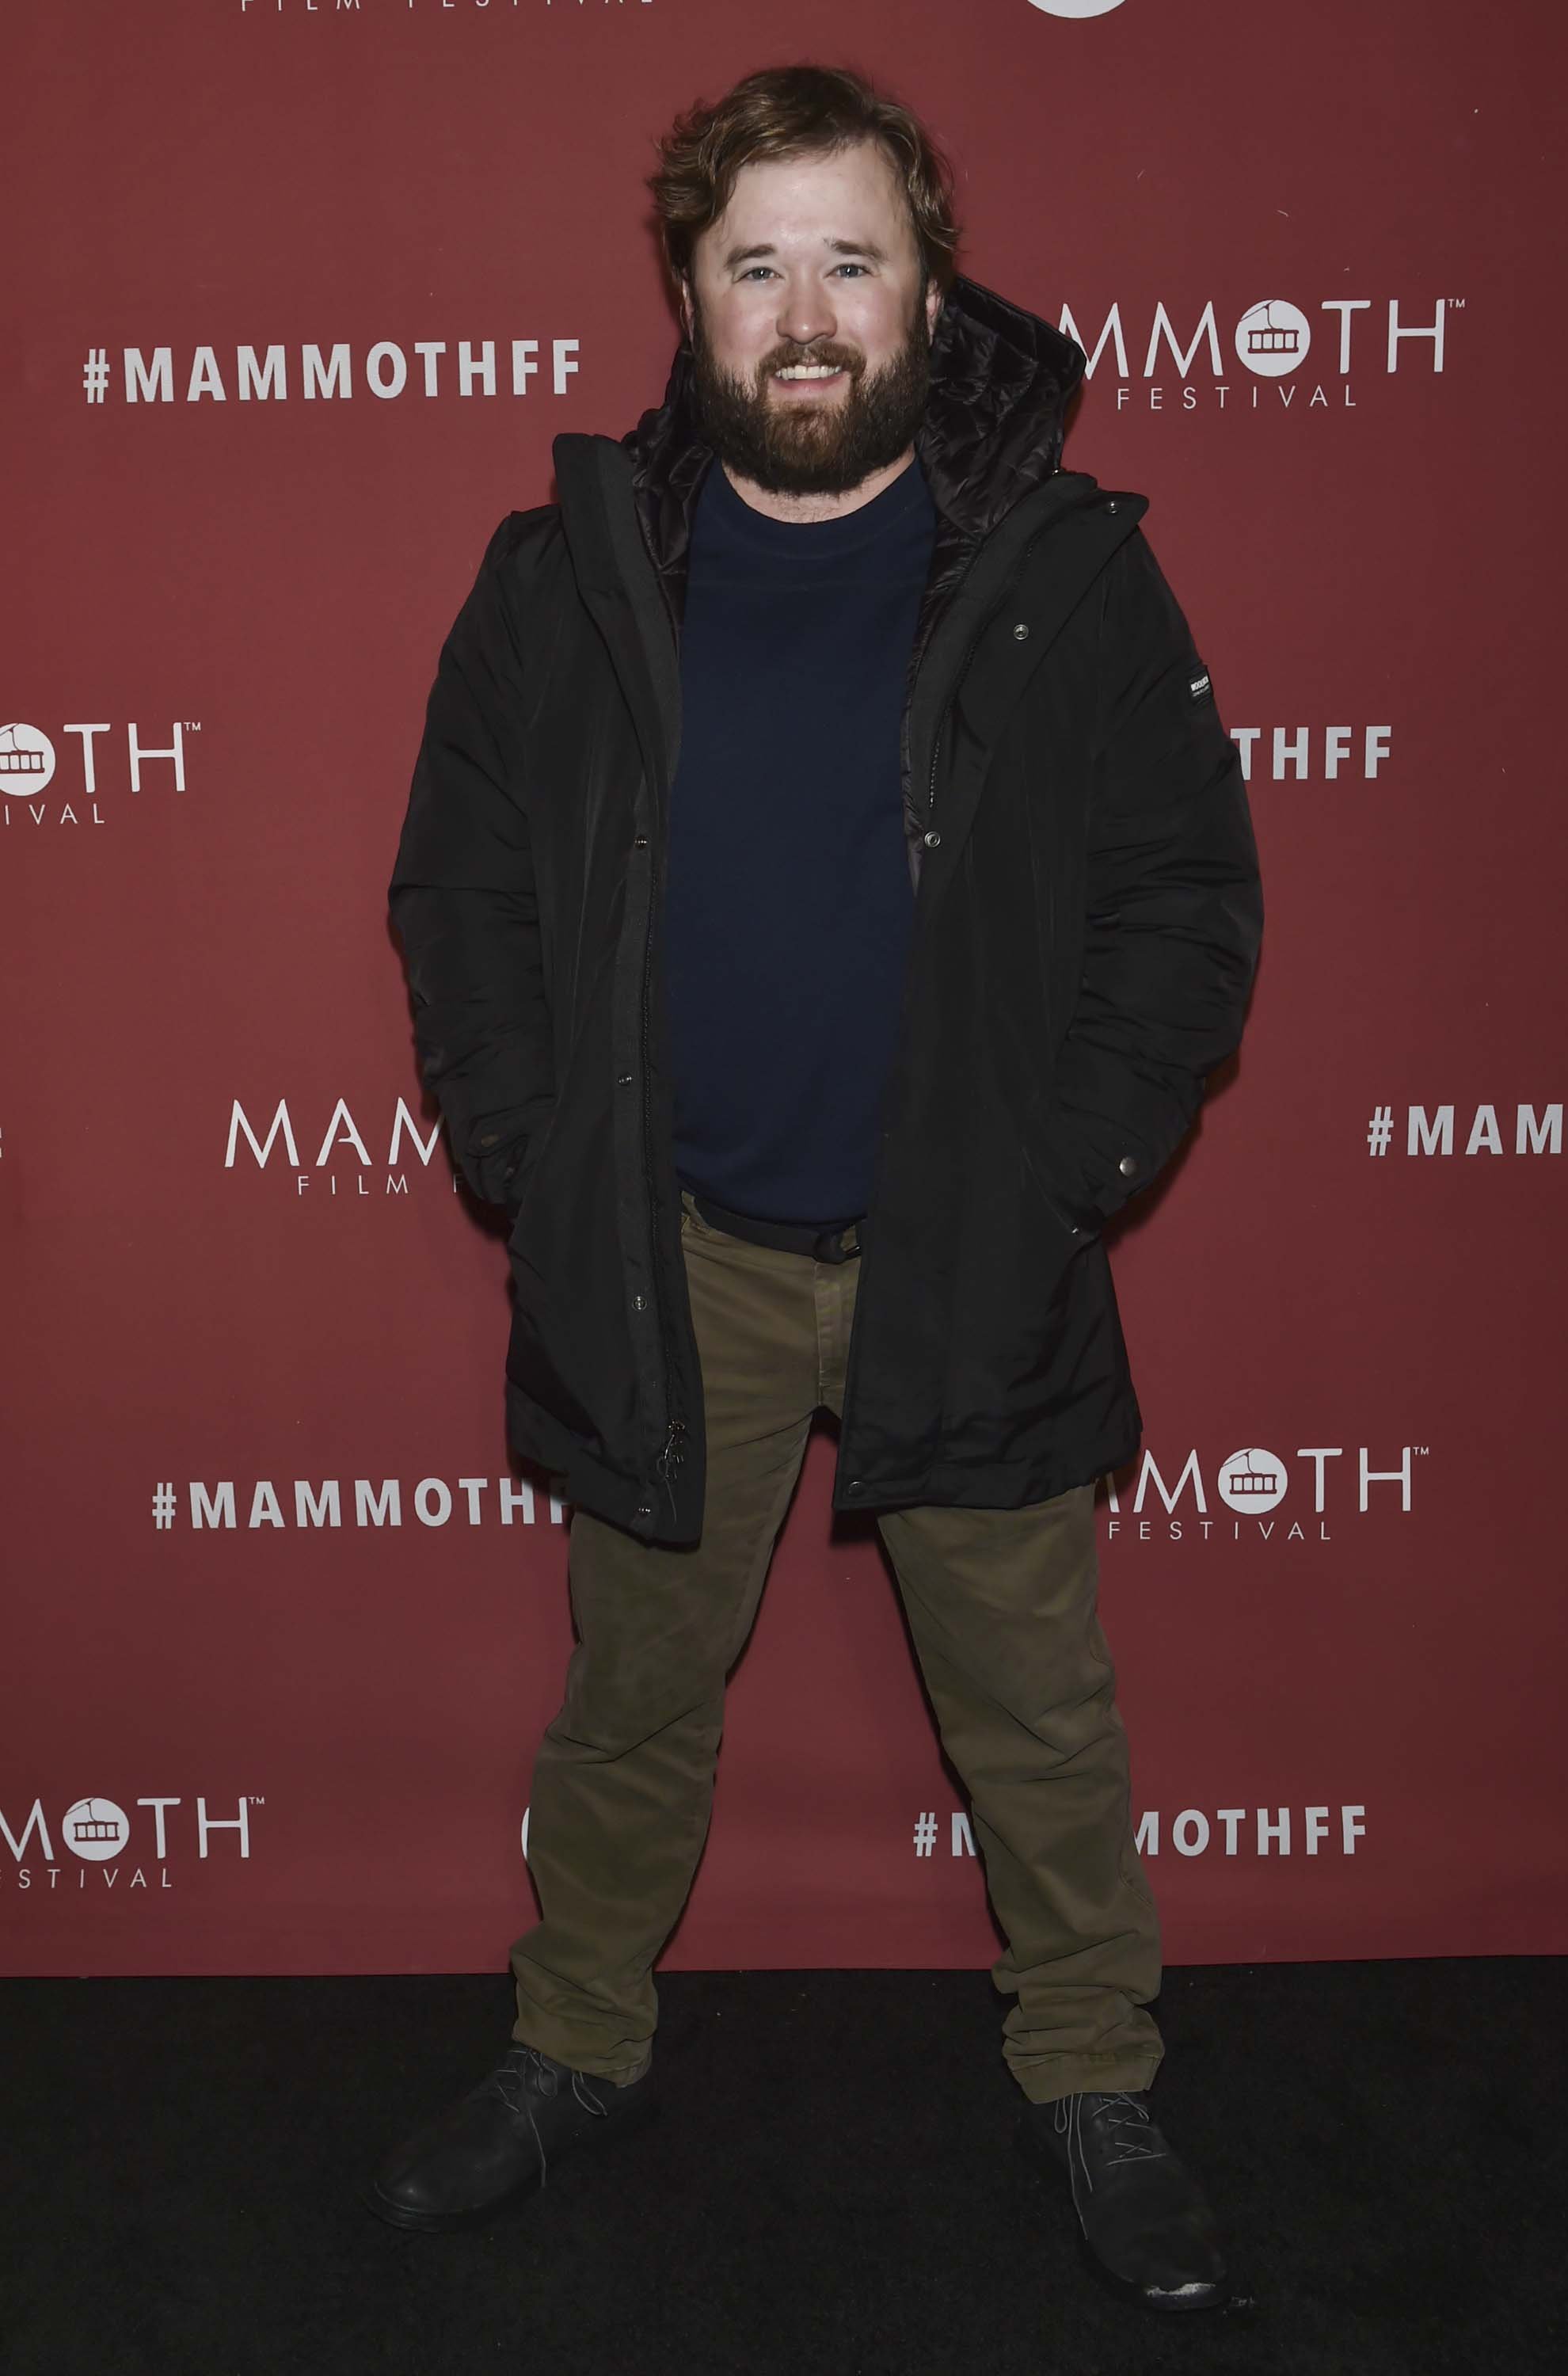 Haley Joel Osment aus dem Film "Extremely Wicked, Shockingly Evil and Vile" beim Annual Mammoth Film Festival am 07. Februar 2019 in Mammoth, Kalifornien. | Quelle: Getty Images